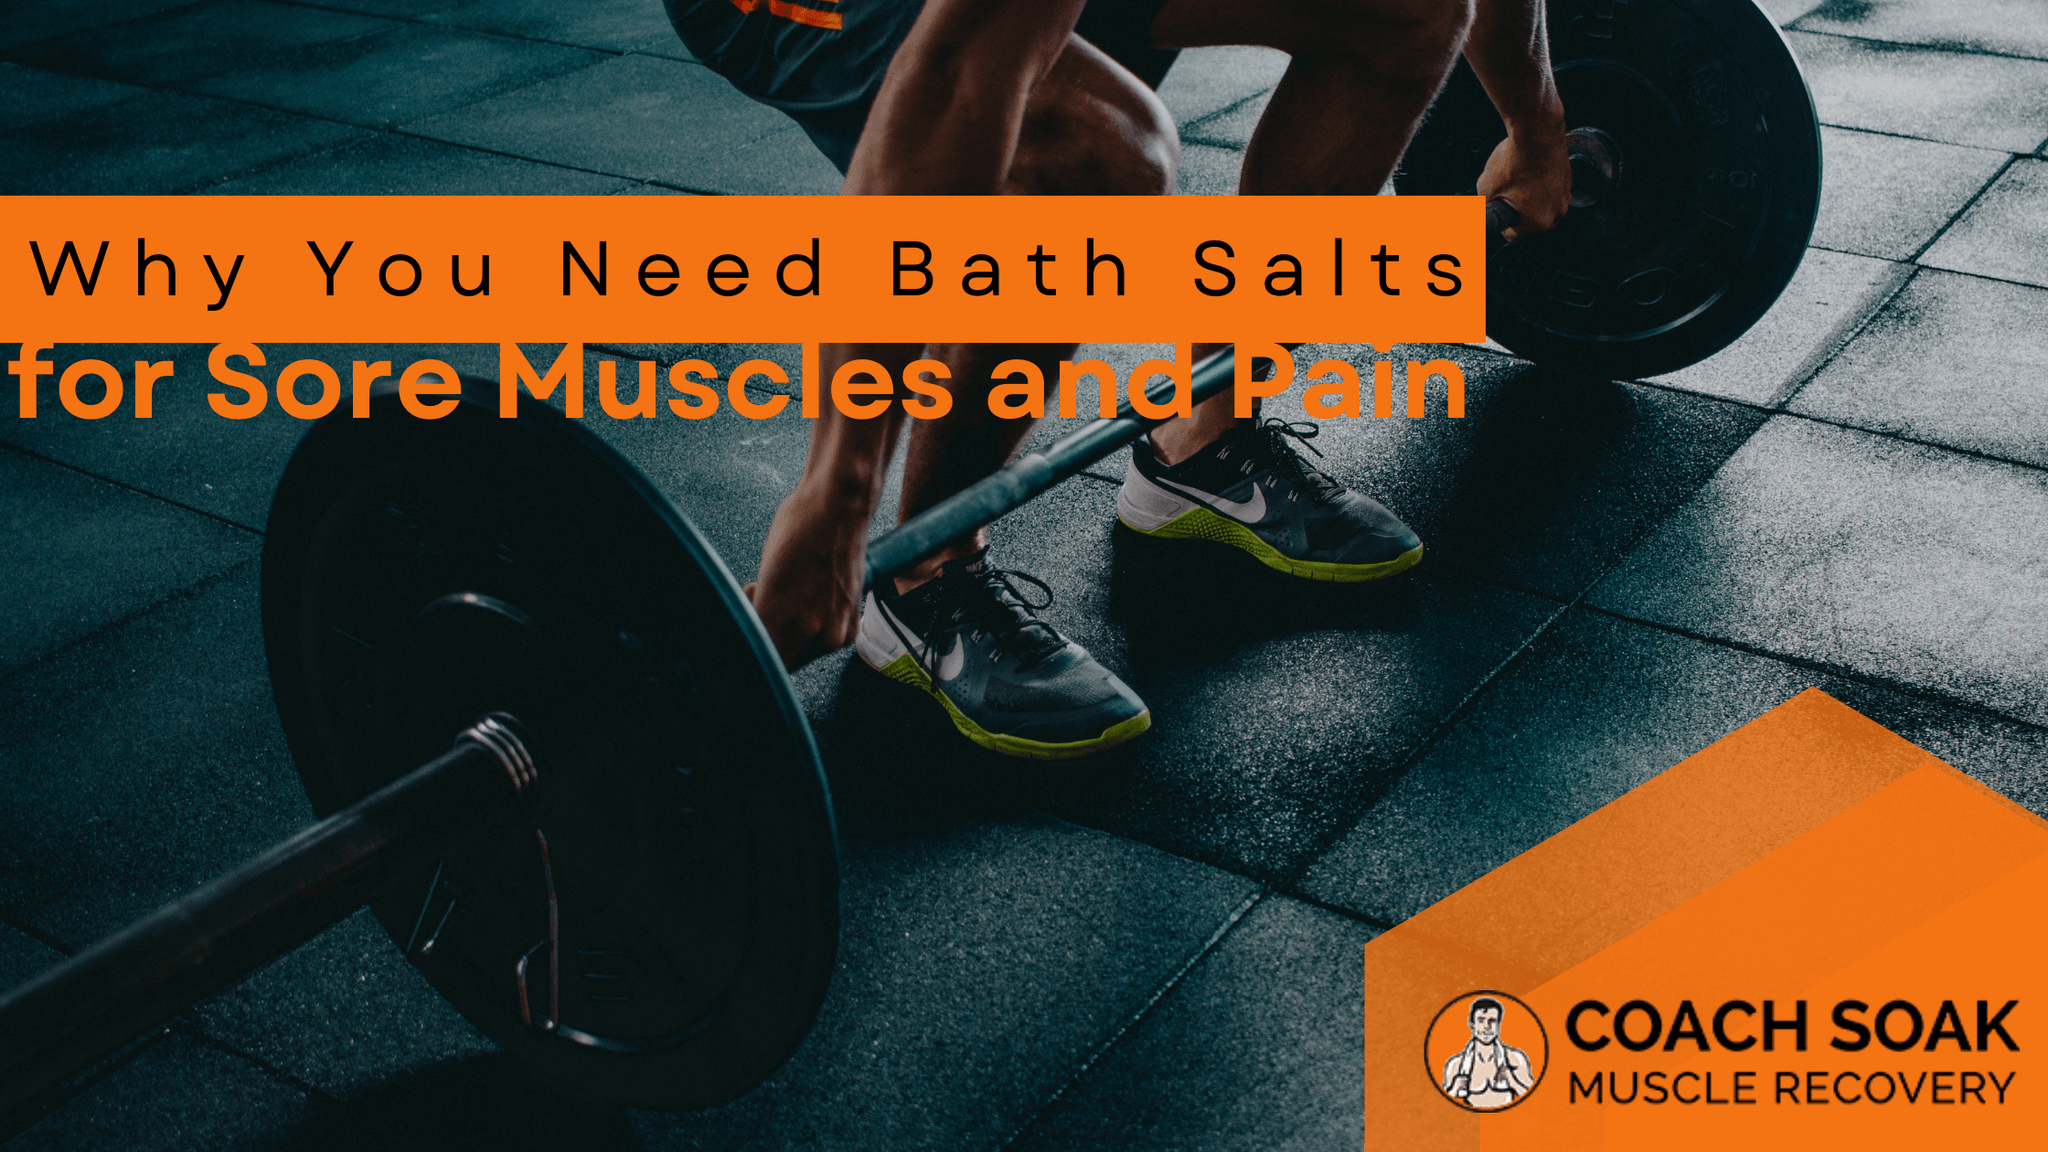 Why You Need Bath Salts for Your Sore Muscles and Pain